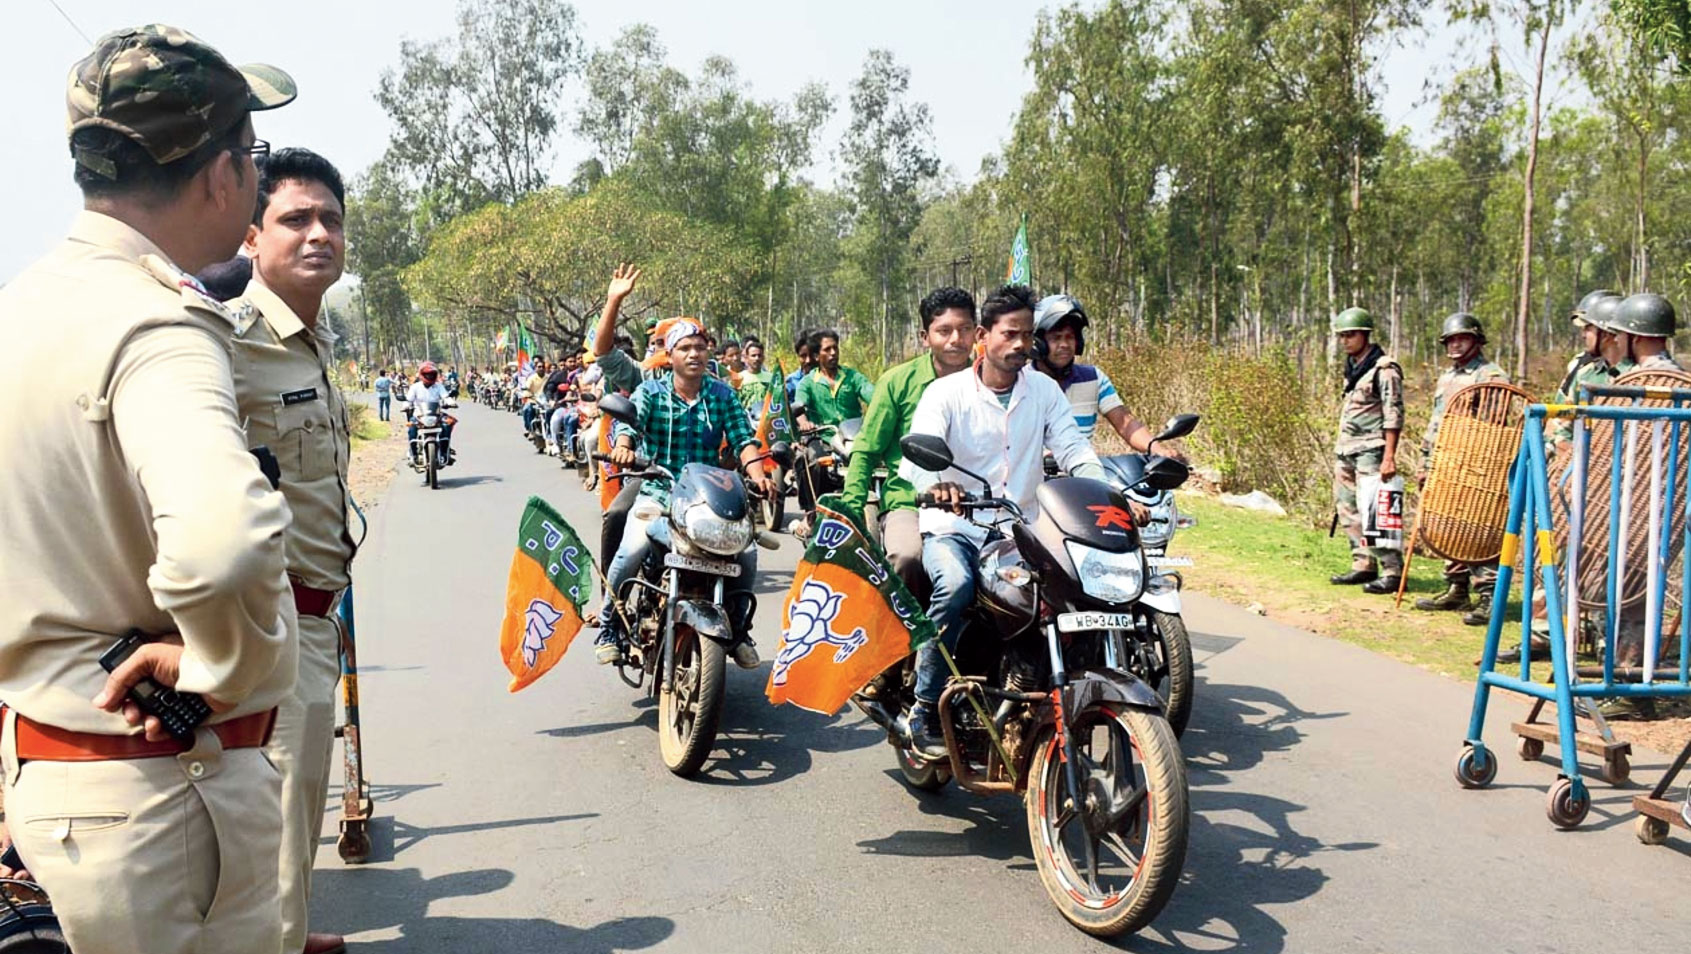 A BJP motorcycle rally in Midnapore.